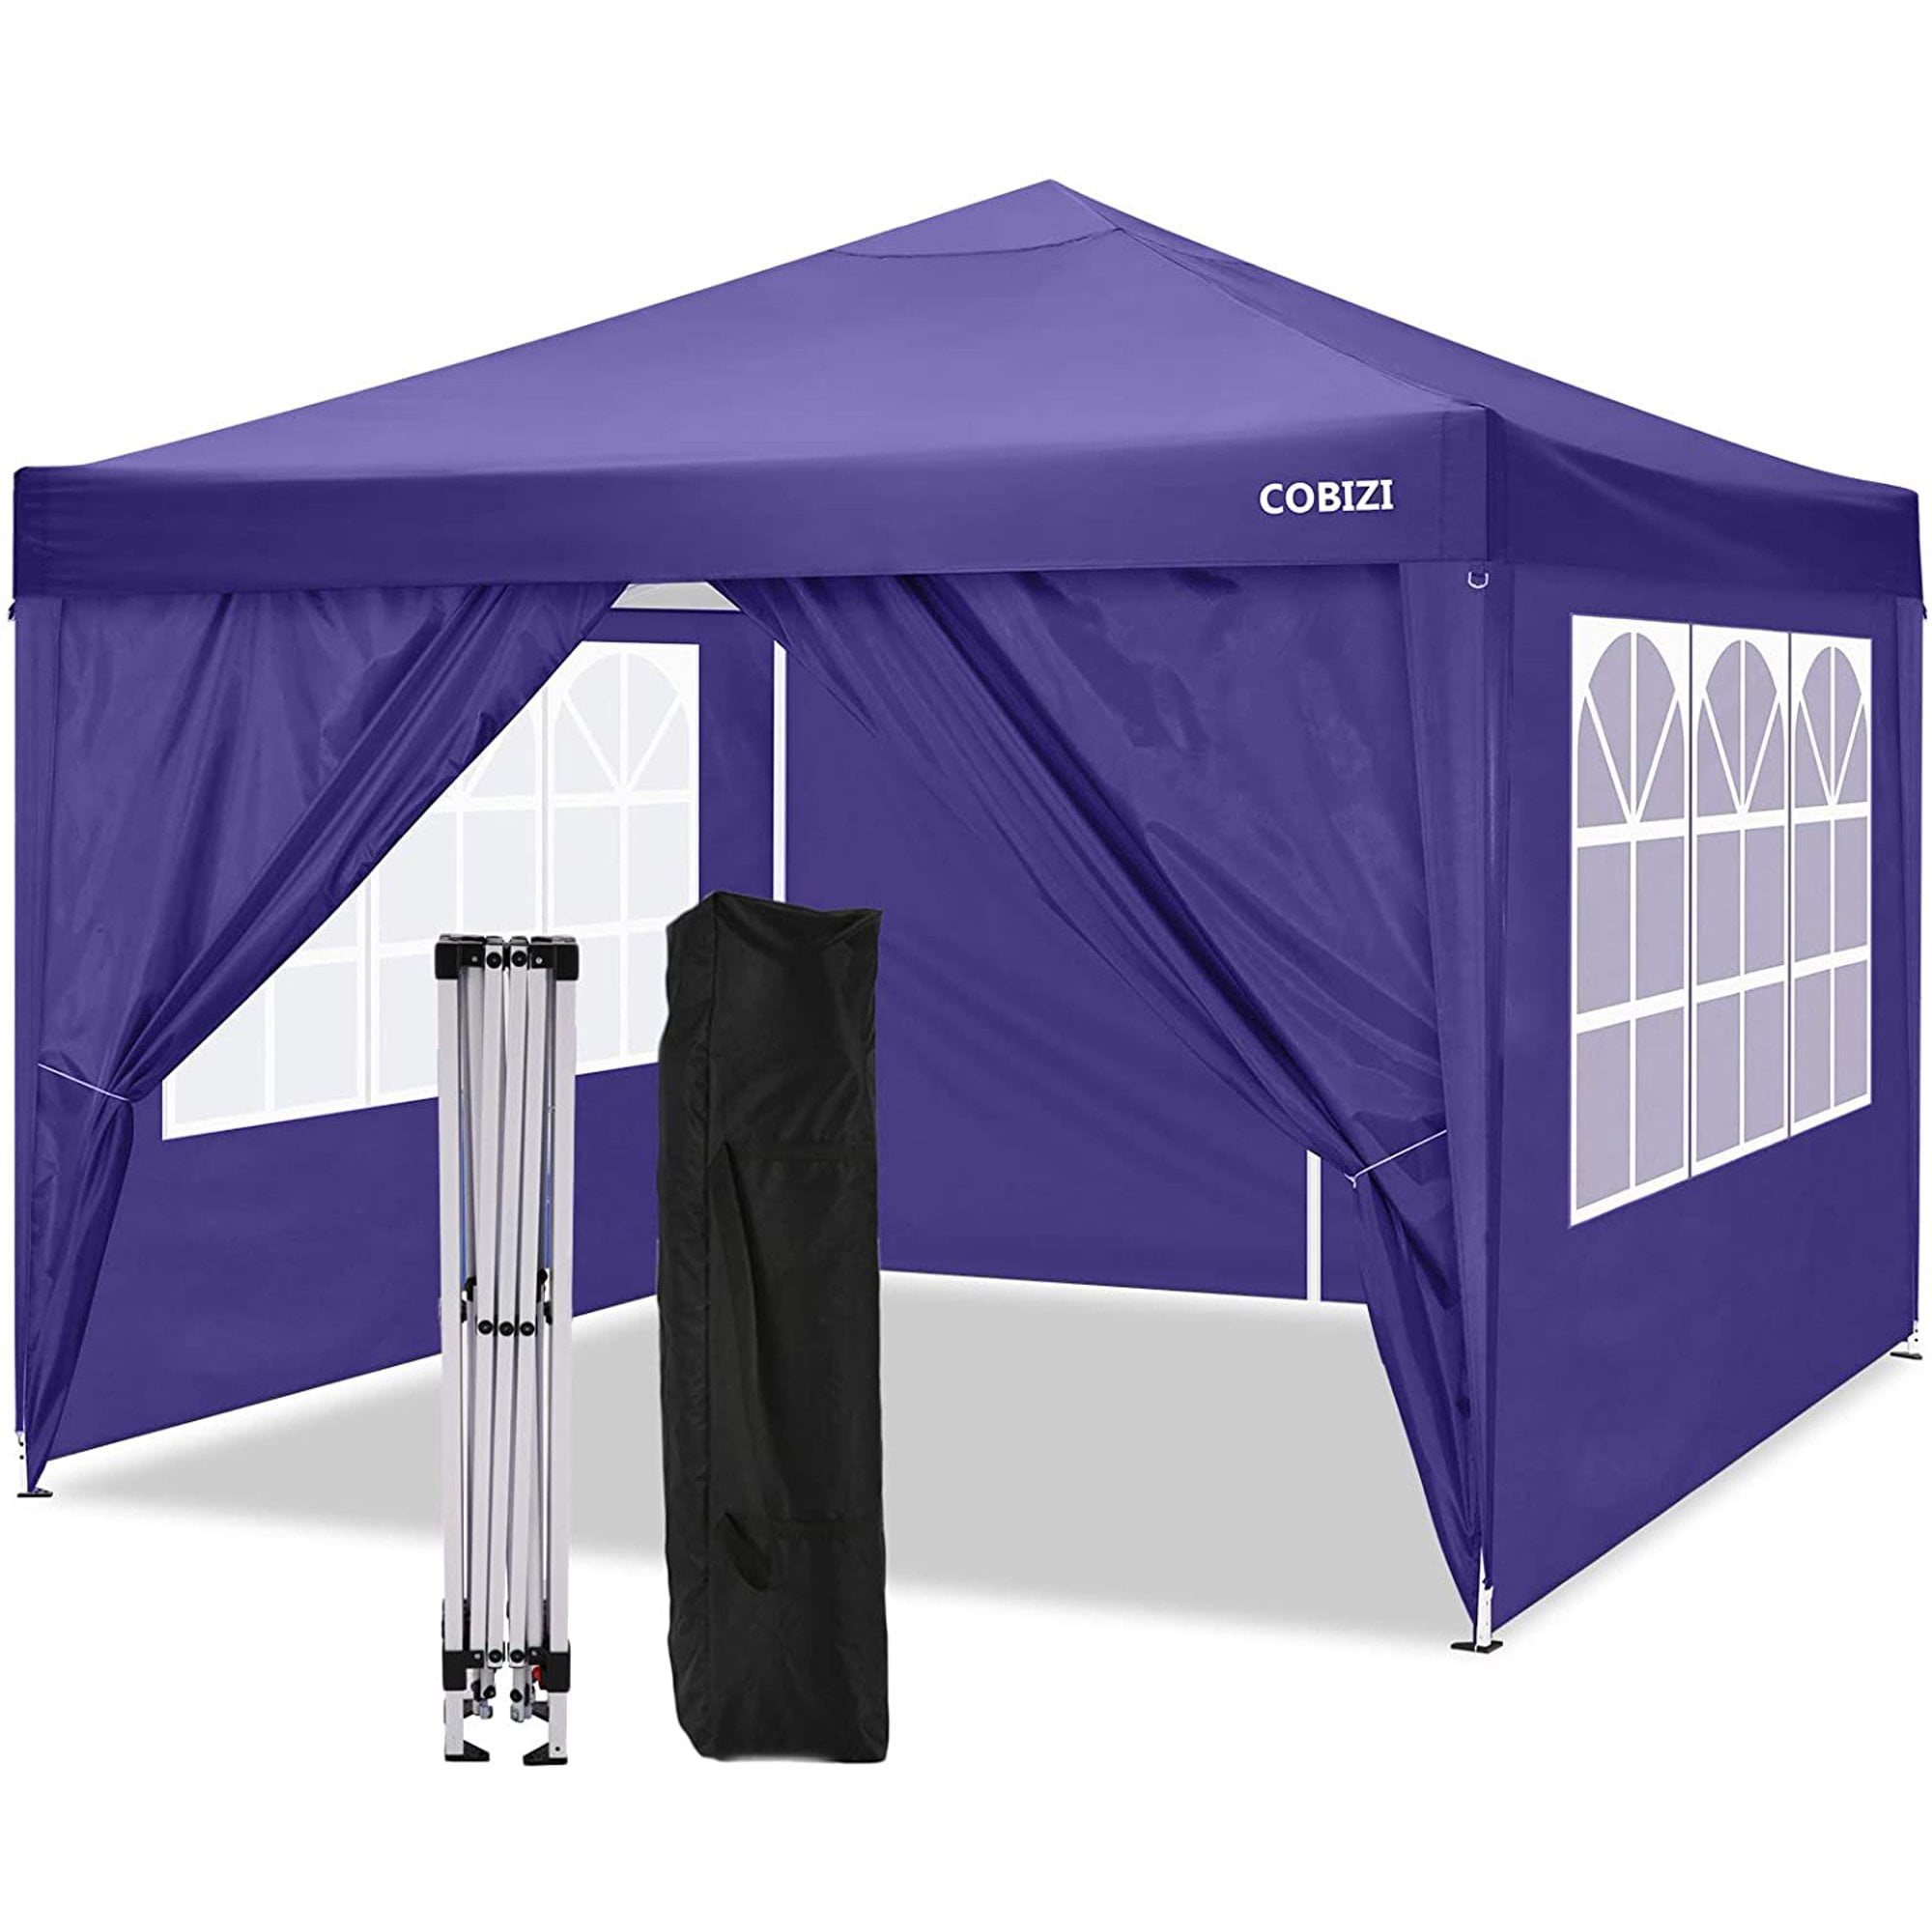 10'x10' Pop Up Canopy Party Tent F Model Upgraded Frame Purple 